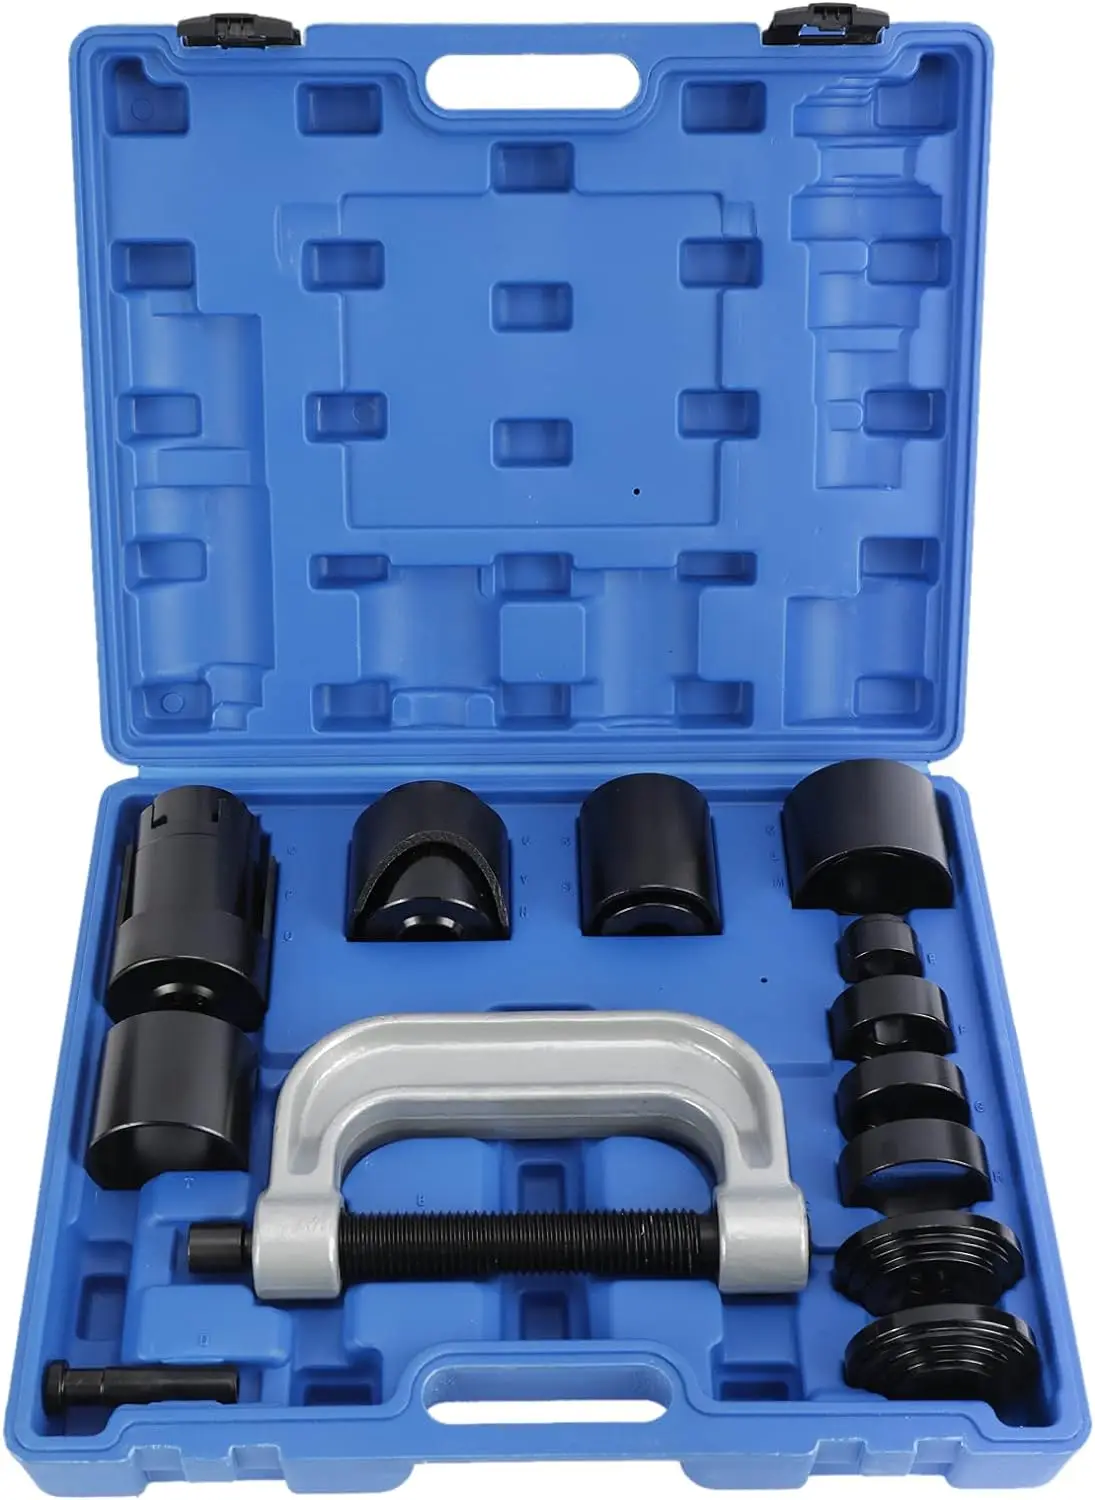 

Press Kit, 21pcs Joint Repair Remover Installer Adapter Kit, Upper and Lower Joint Service Kit with C-Press